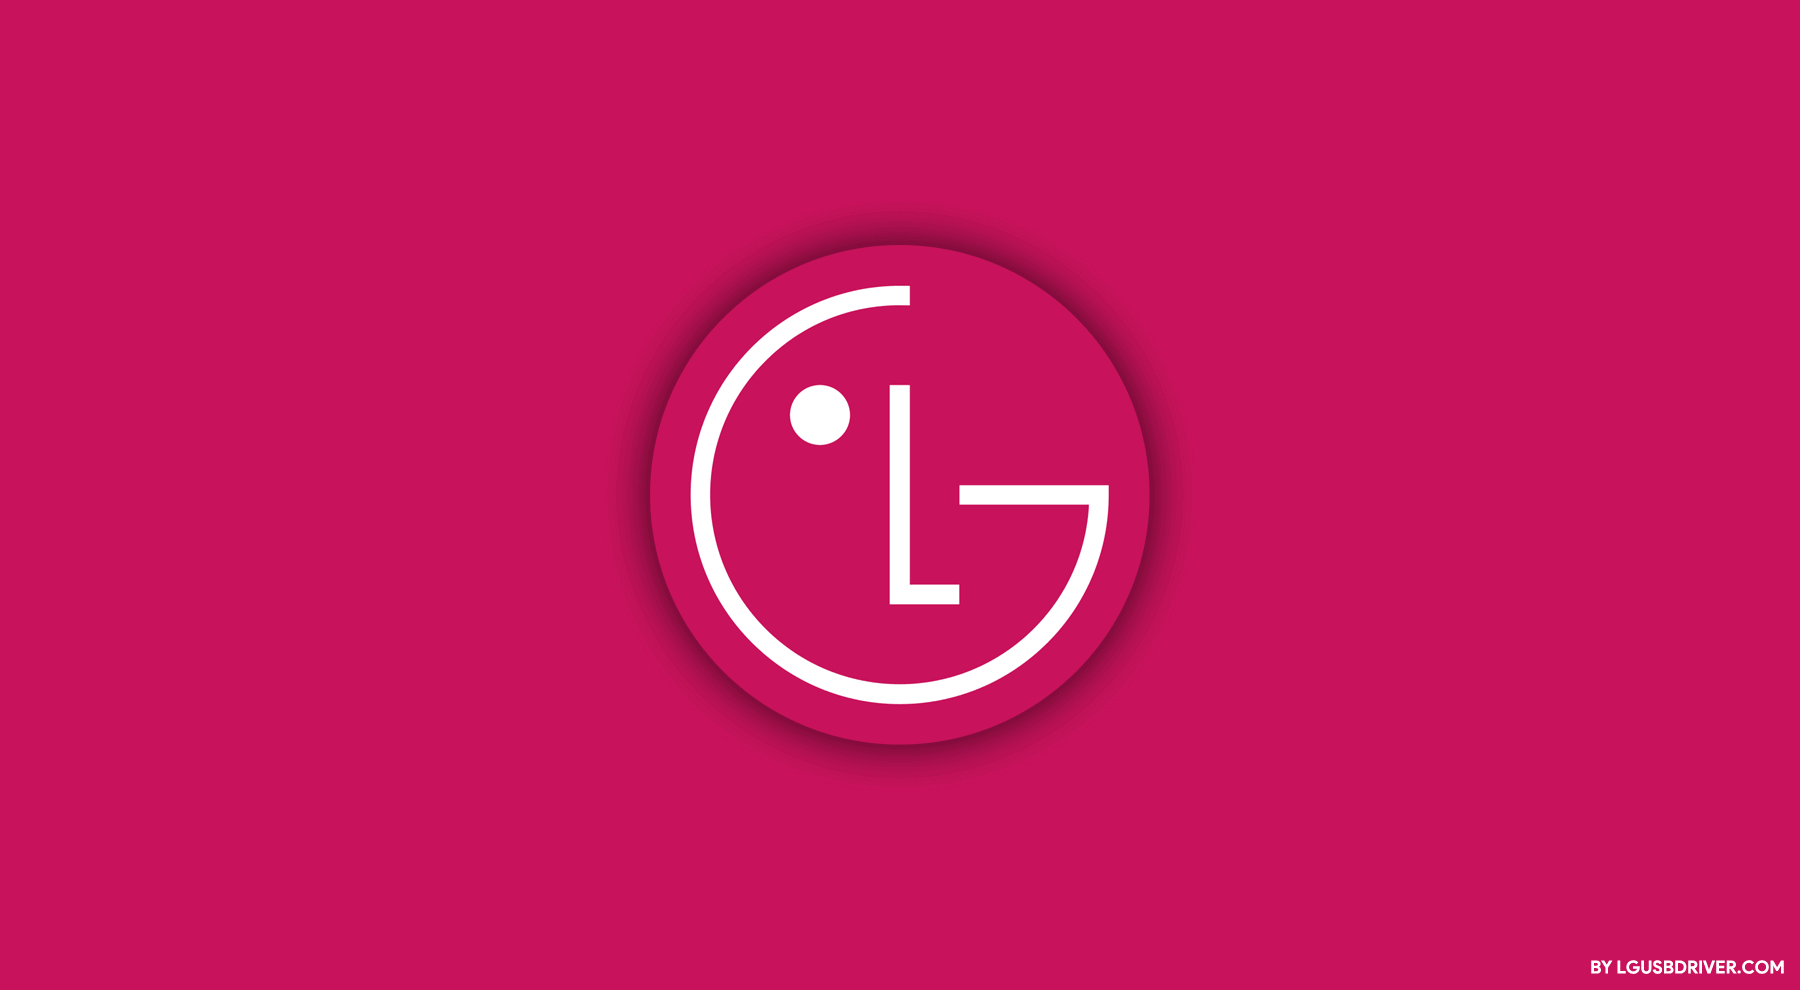 LG Wallpapers 04